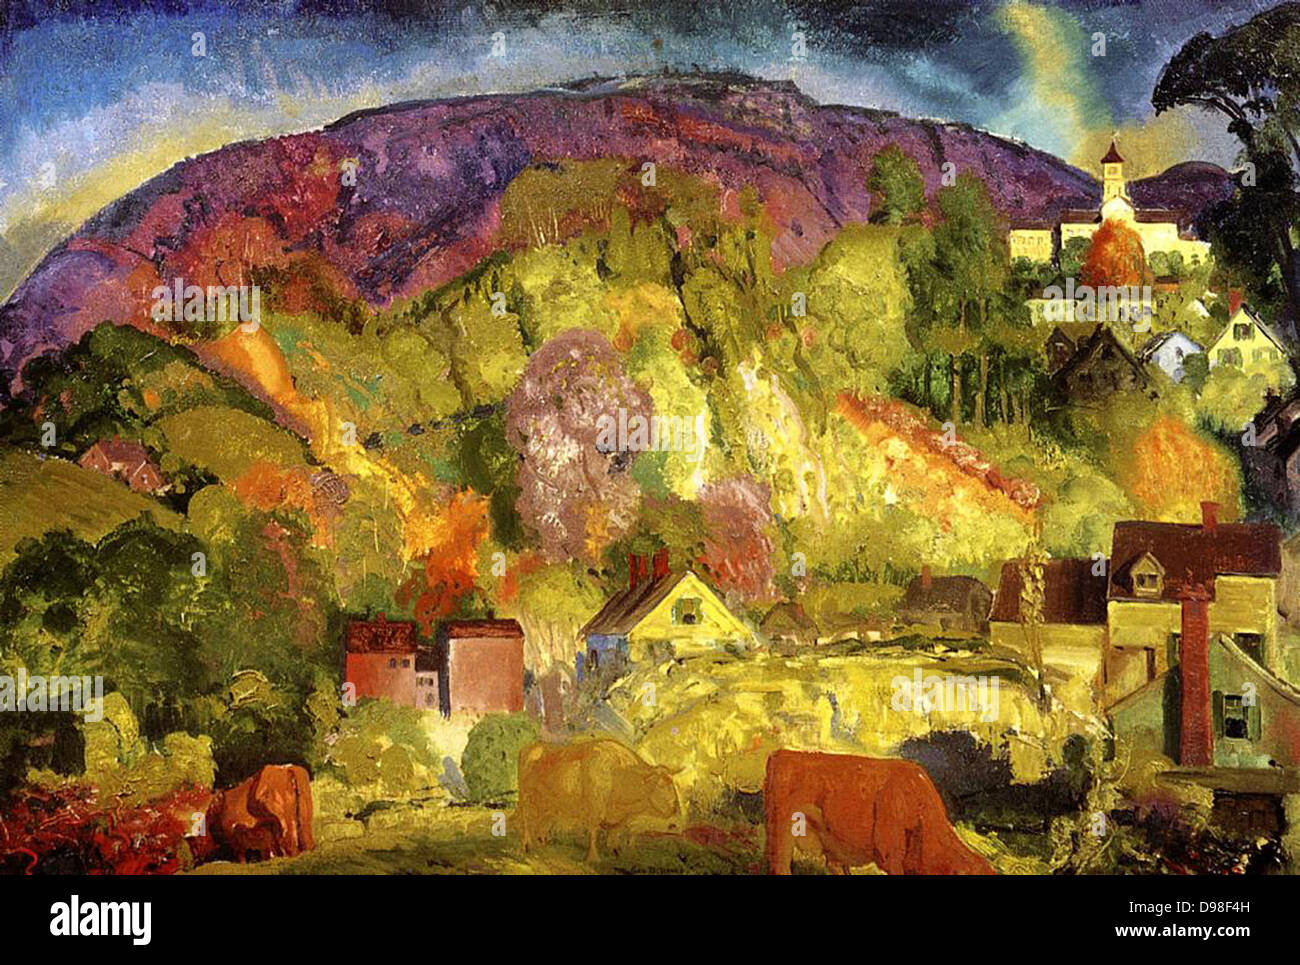 George Wesley Bellows, American Ashcan School (1882-1925), peintre. 'Le village on the hill', 1917 Banque D'Images